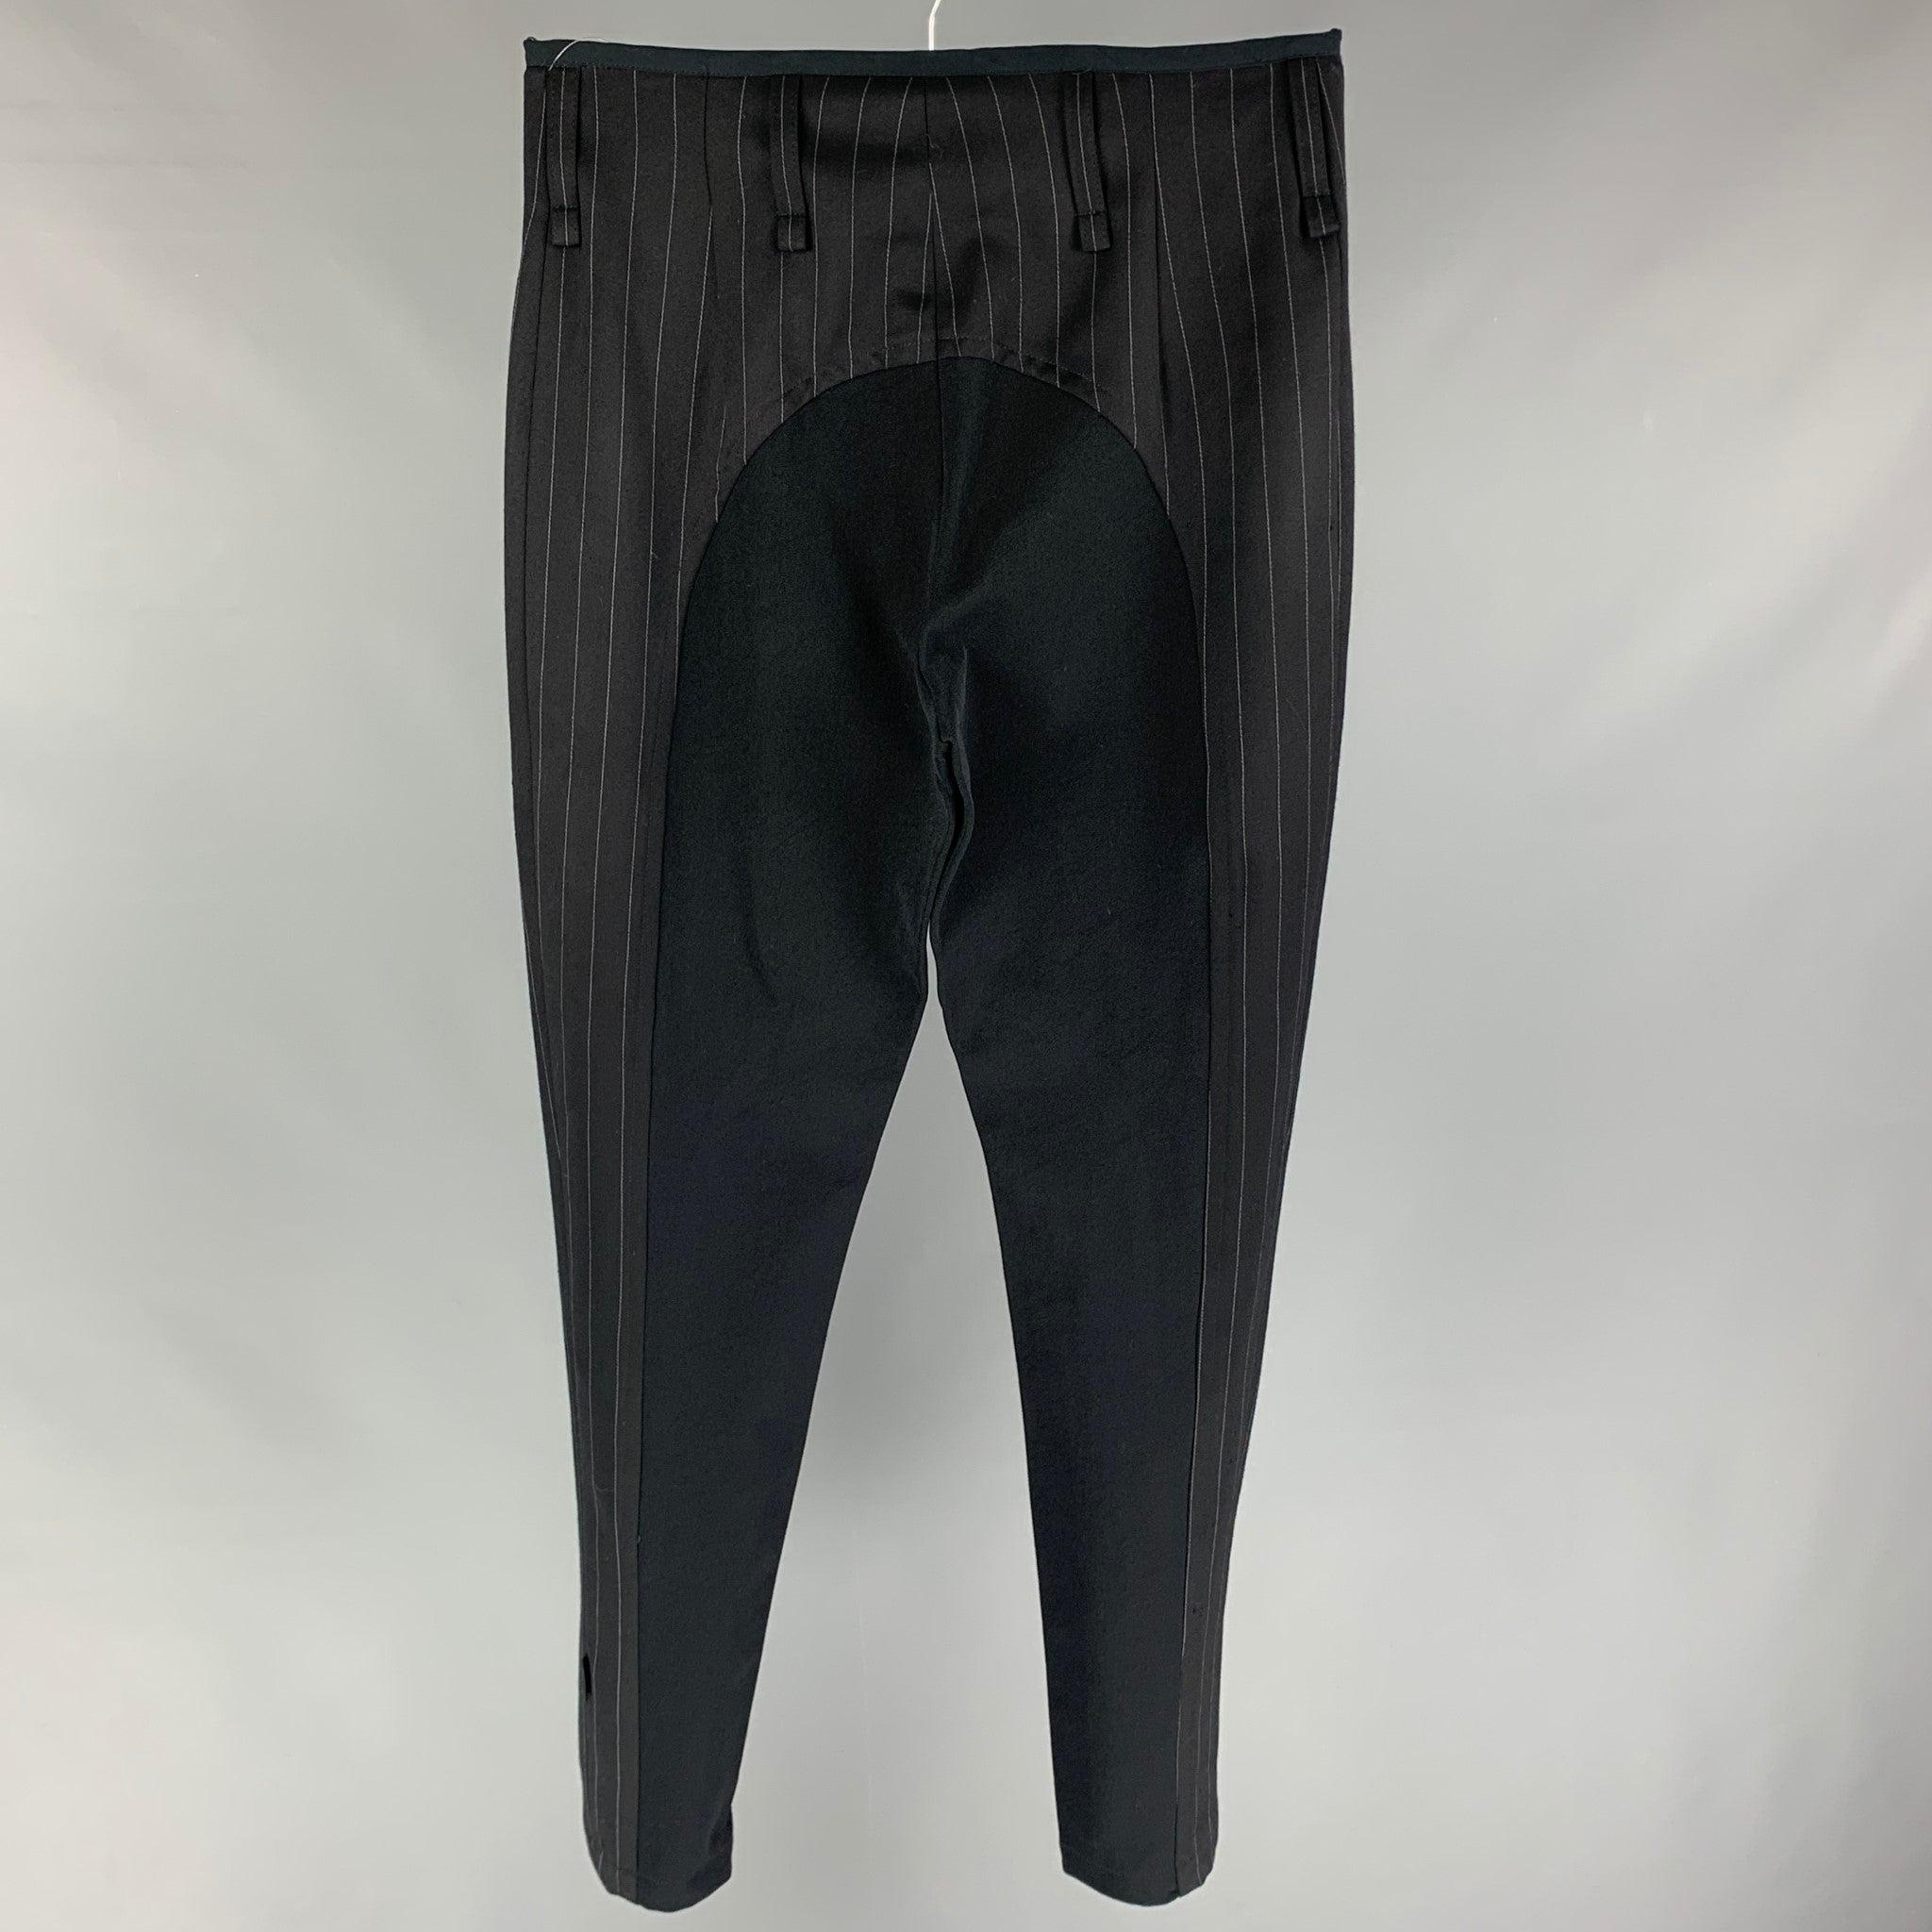 JOHN RICHMOND Size 32 Black Stripe Nylon Blend Zip Fly Casual Pants In Good Condition For Sale In San Francisco, CA